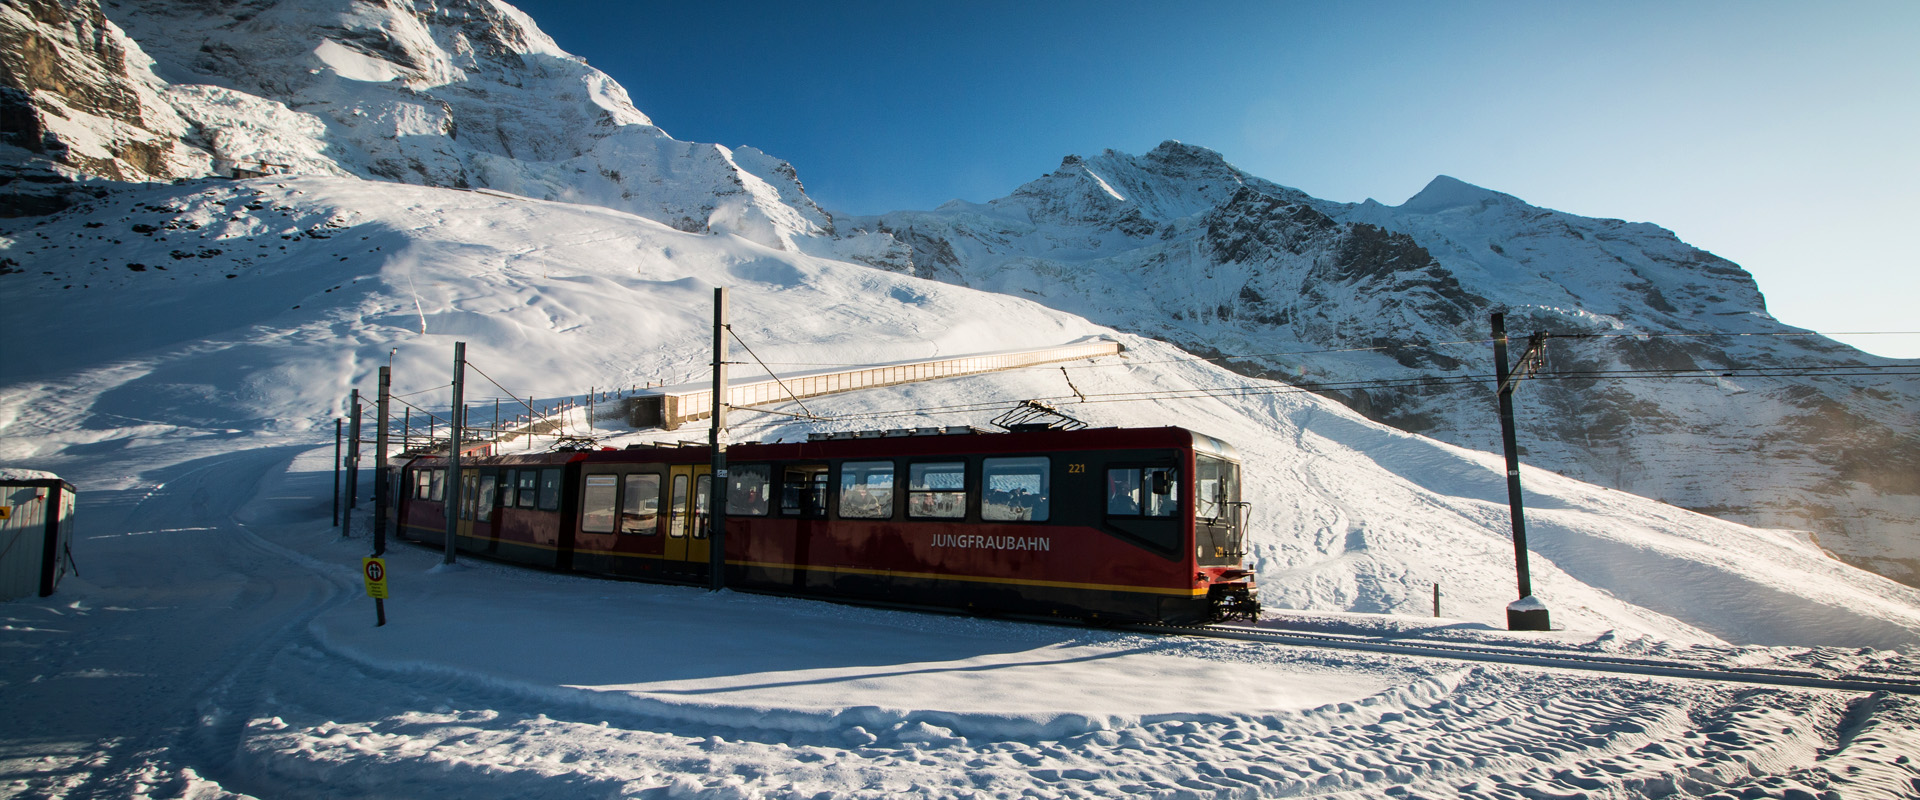 Swiss Alps in winter - what to see and do